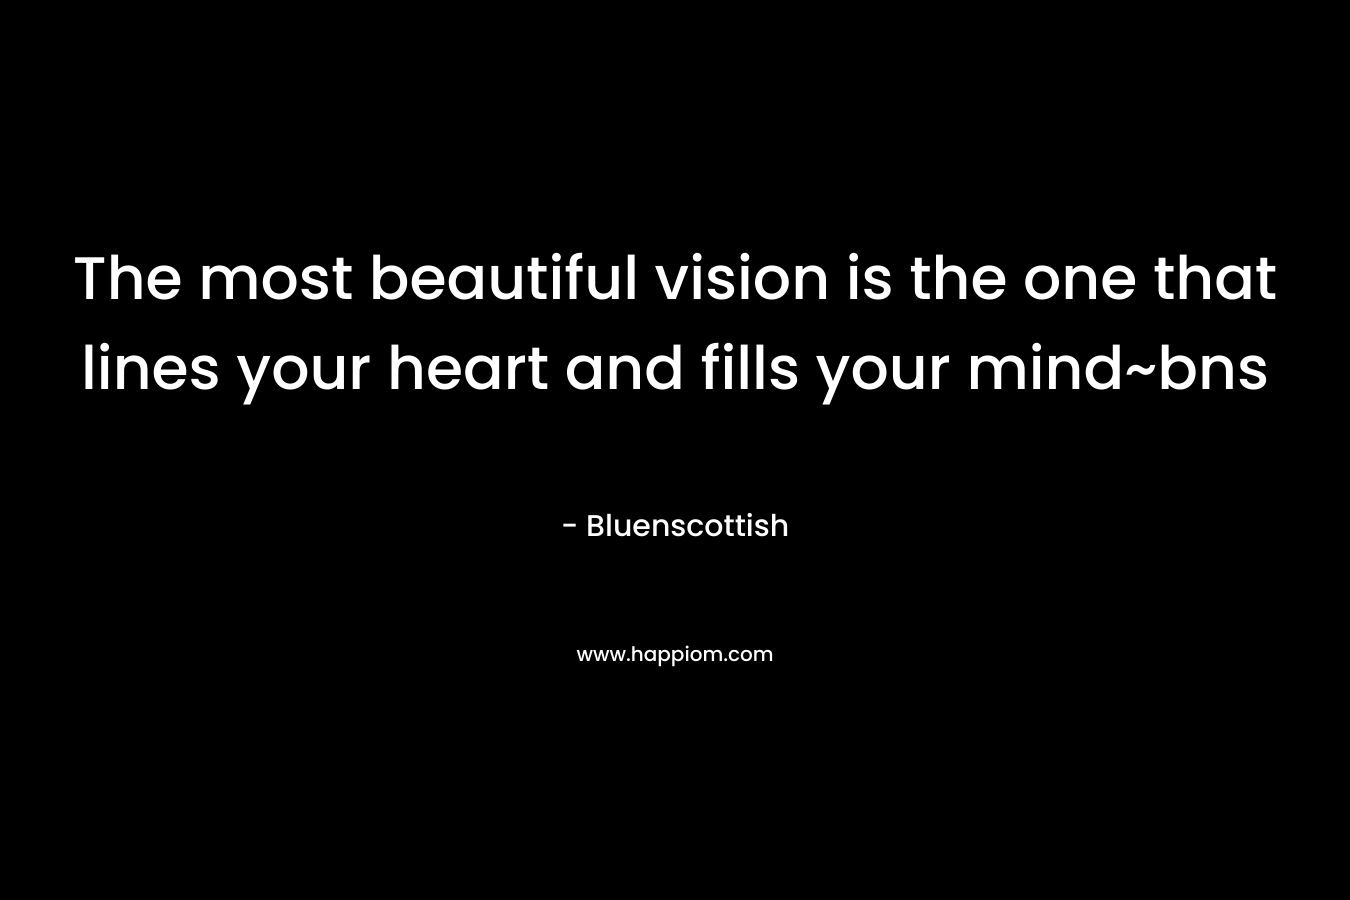 The most beautiful vision is the one that lines your heart and fills your mind~bns – Bluenscottish